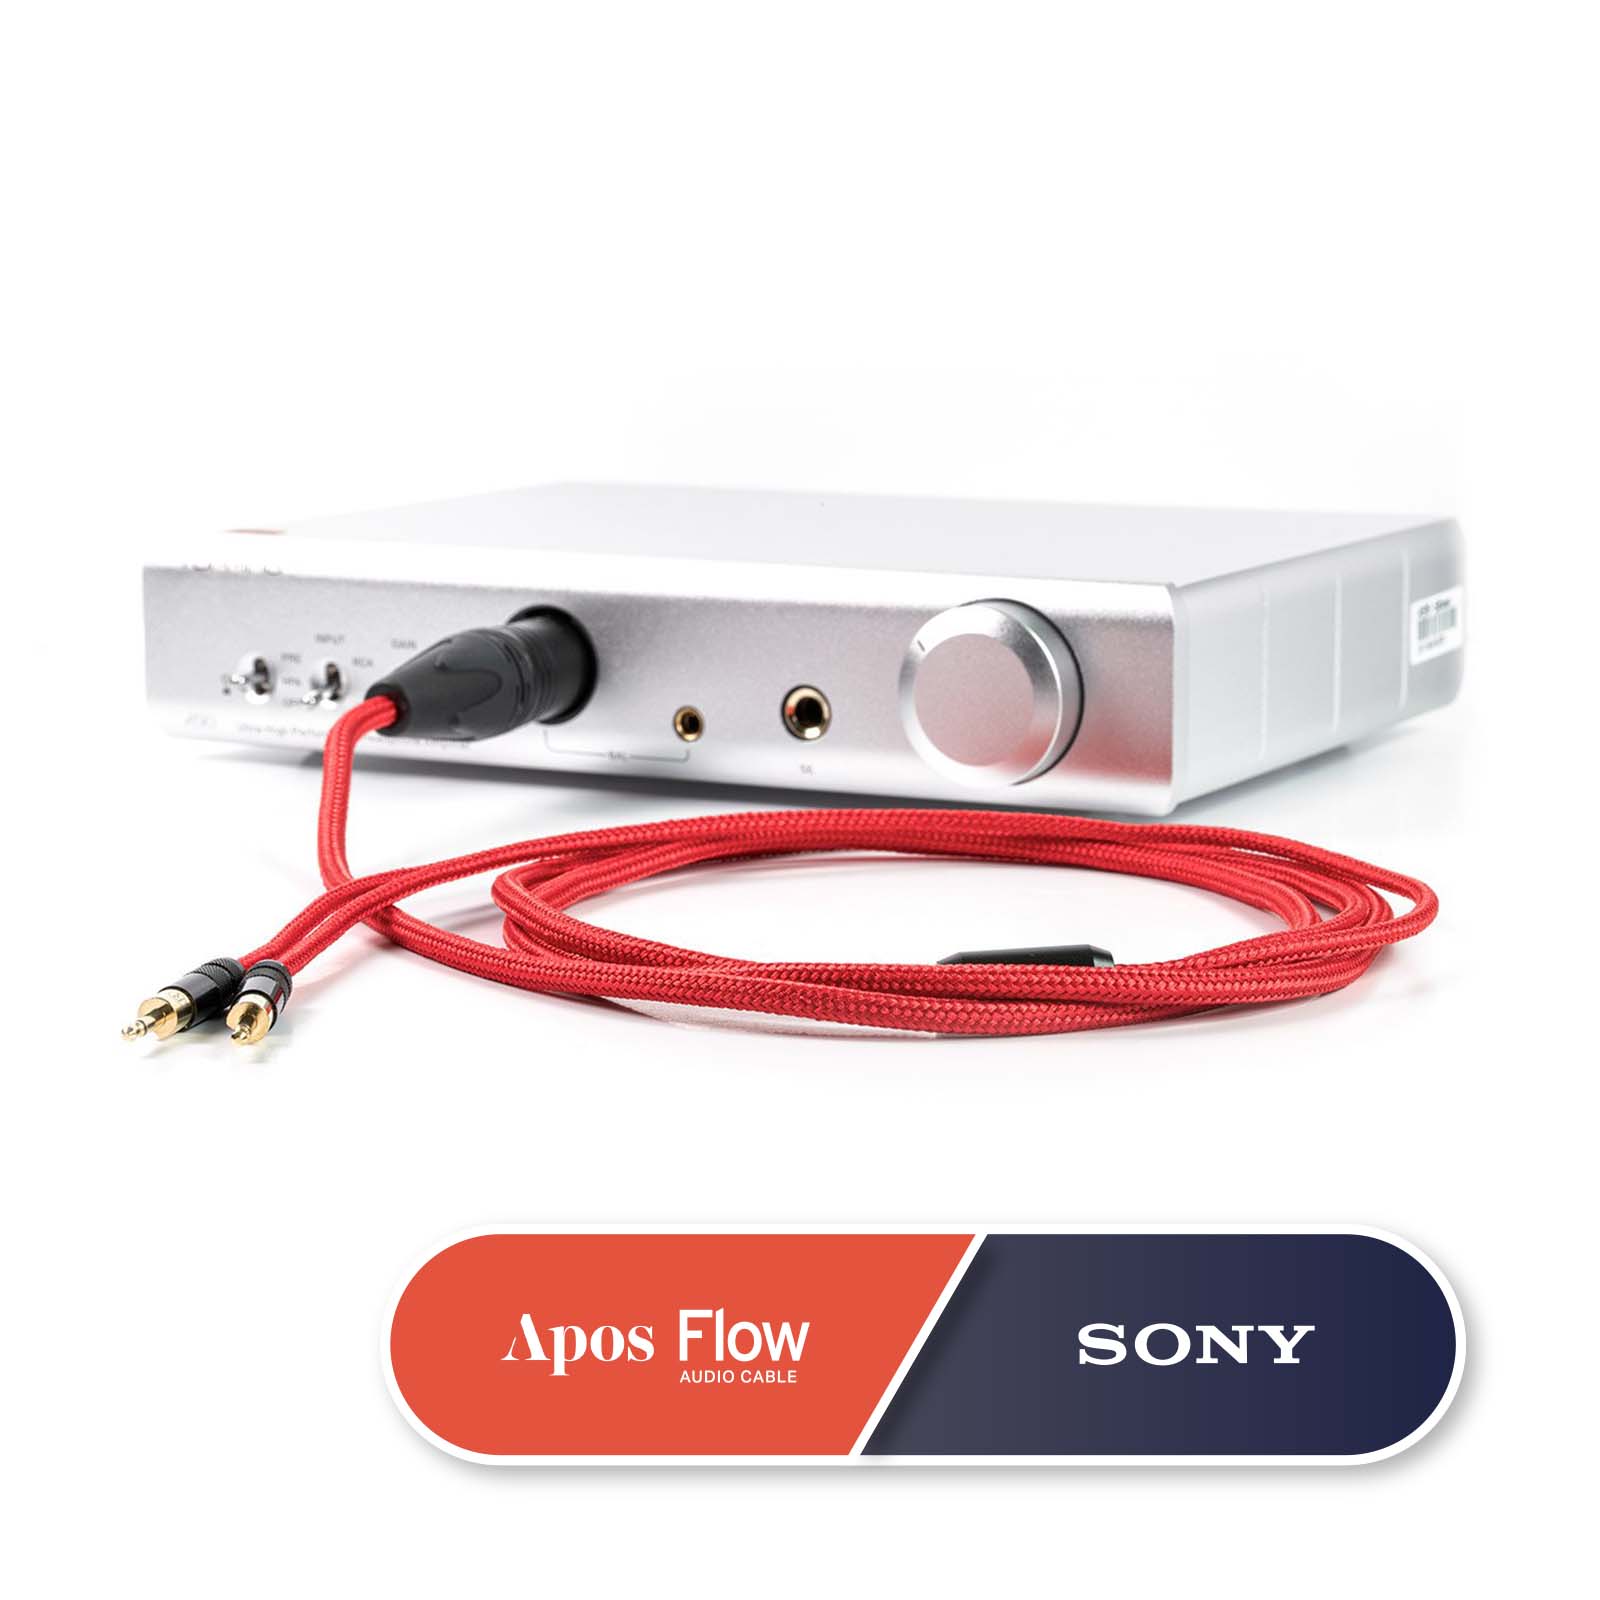 Apos Flow Headphone Cable for [Sony] Z1R / MDR-Z7M2